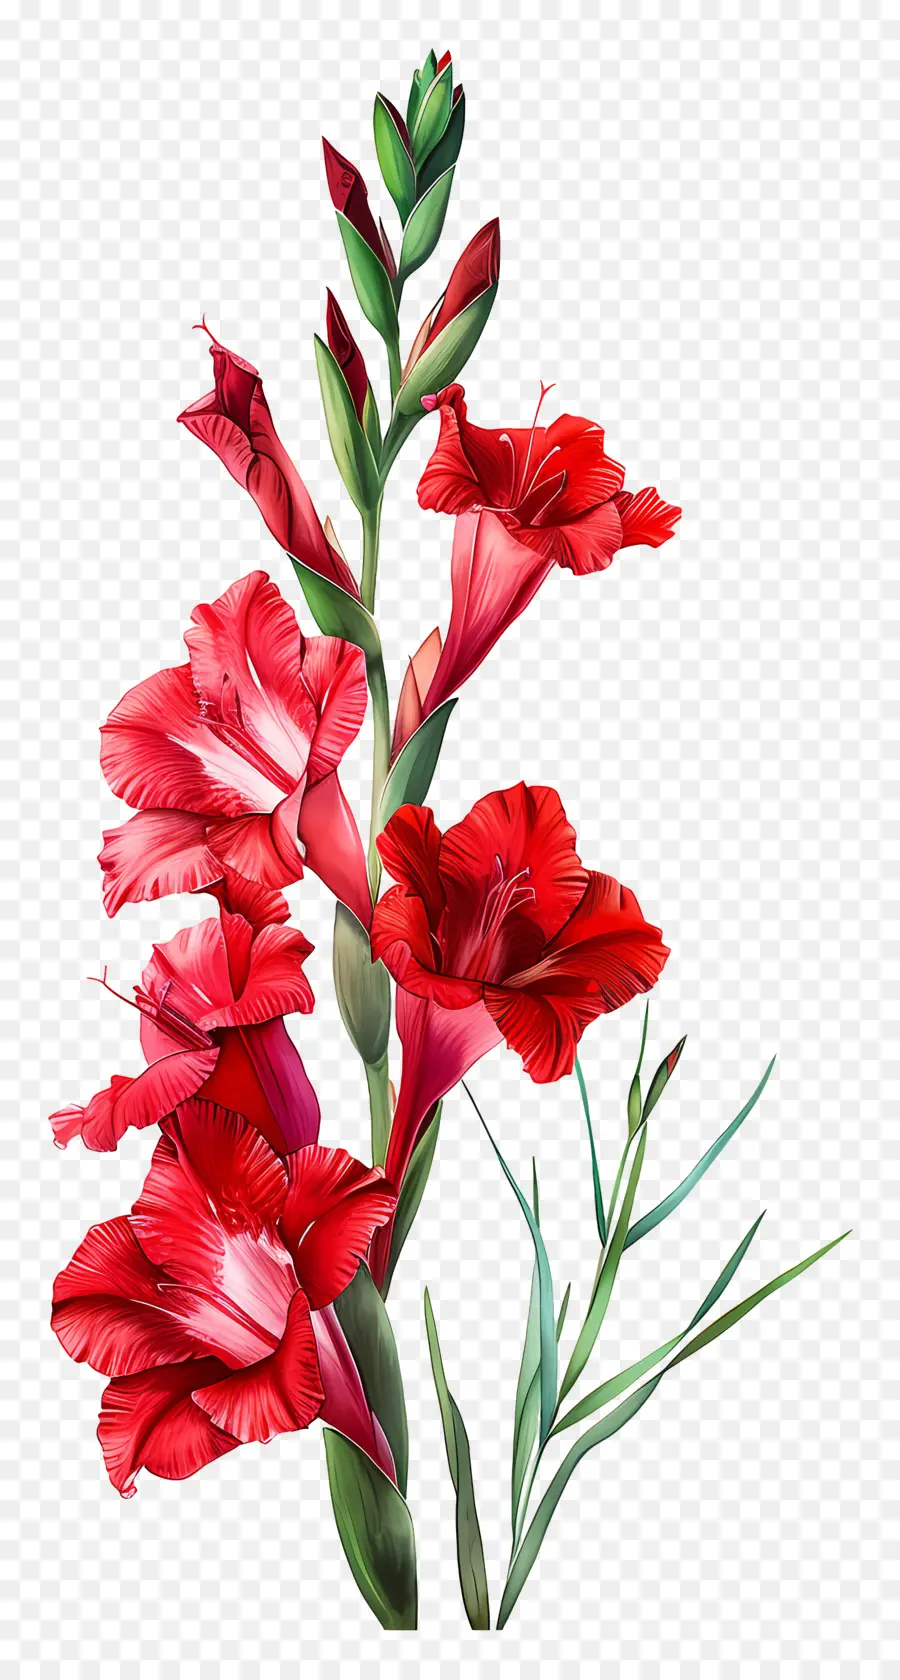 red gladioli red flowers symmetrical arrangement vibrant color blooming flowers